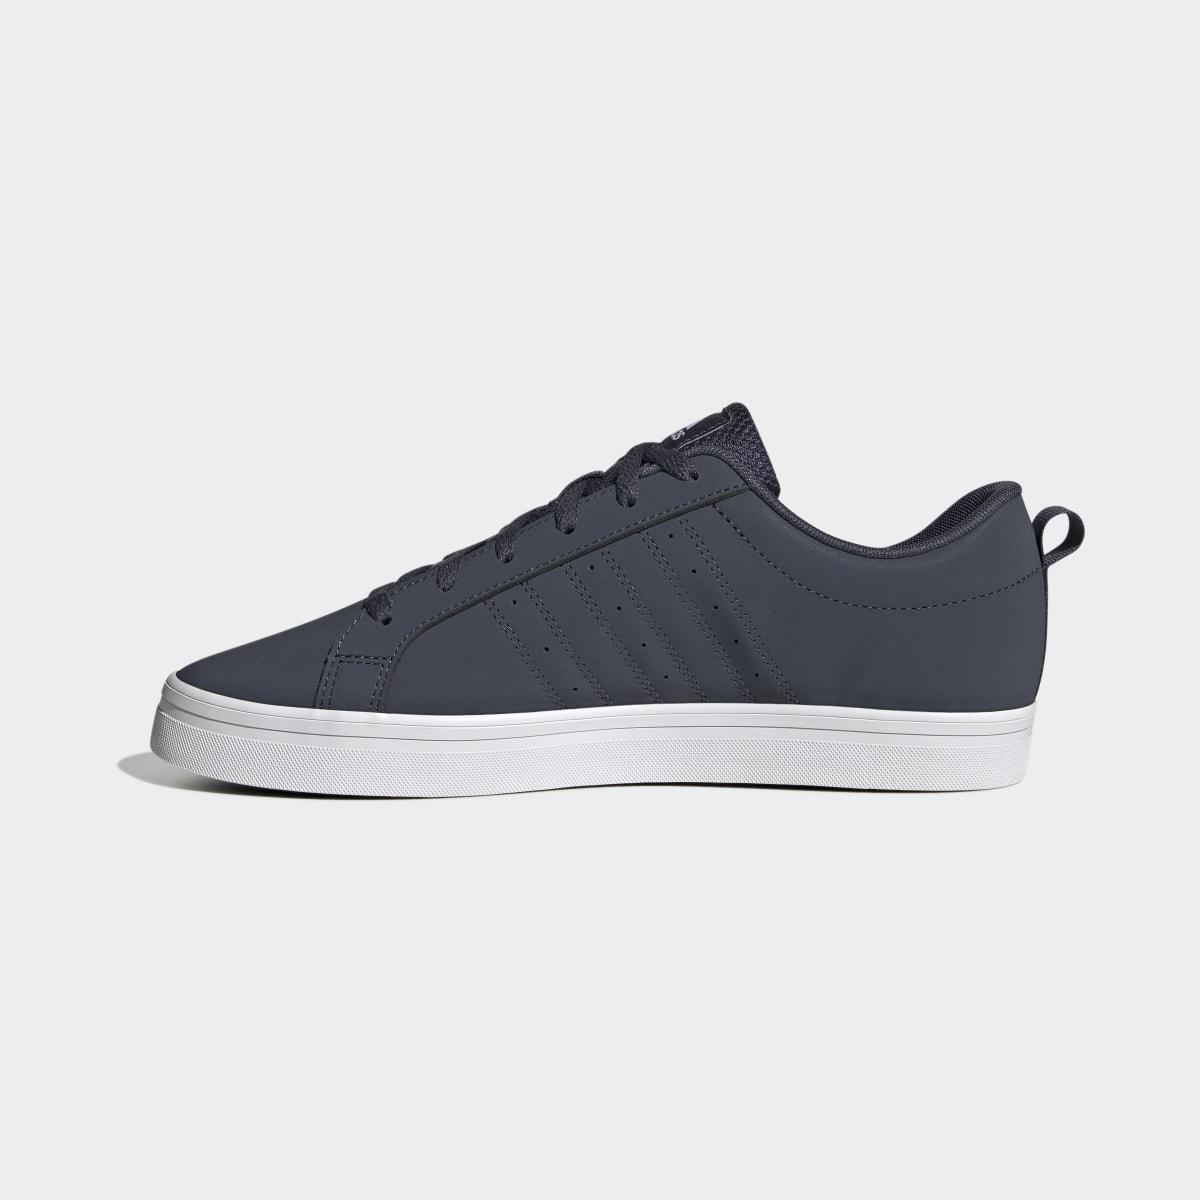 Adidas Chaussure VS Pace 2.0. 7